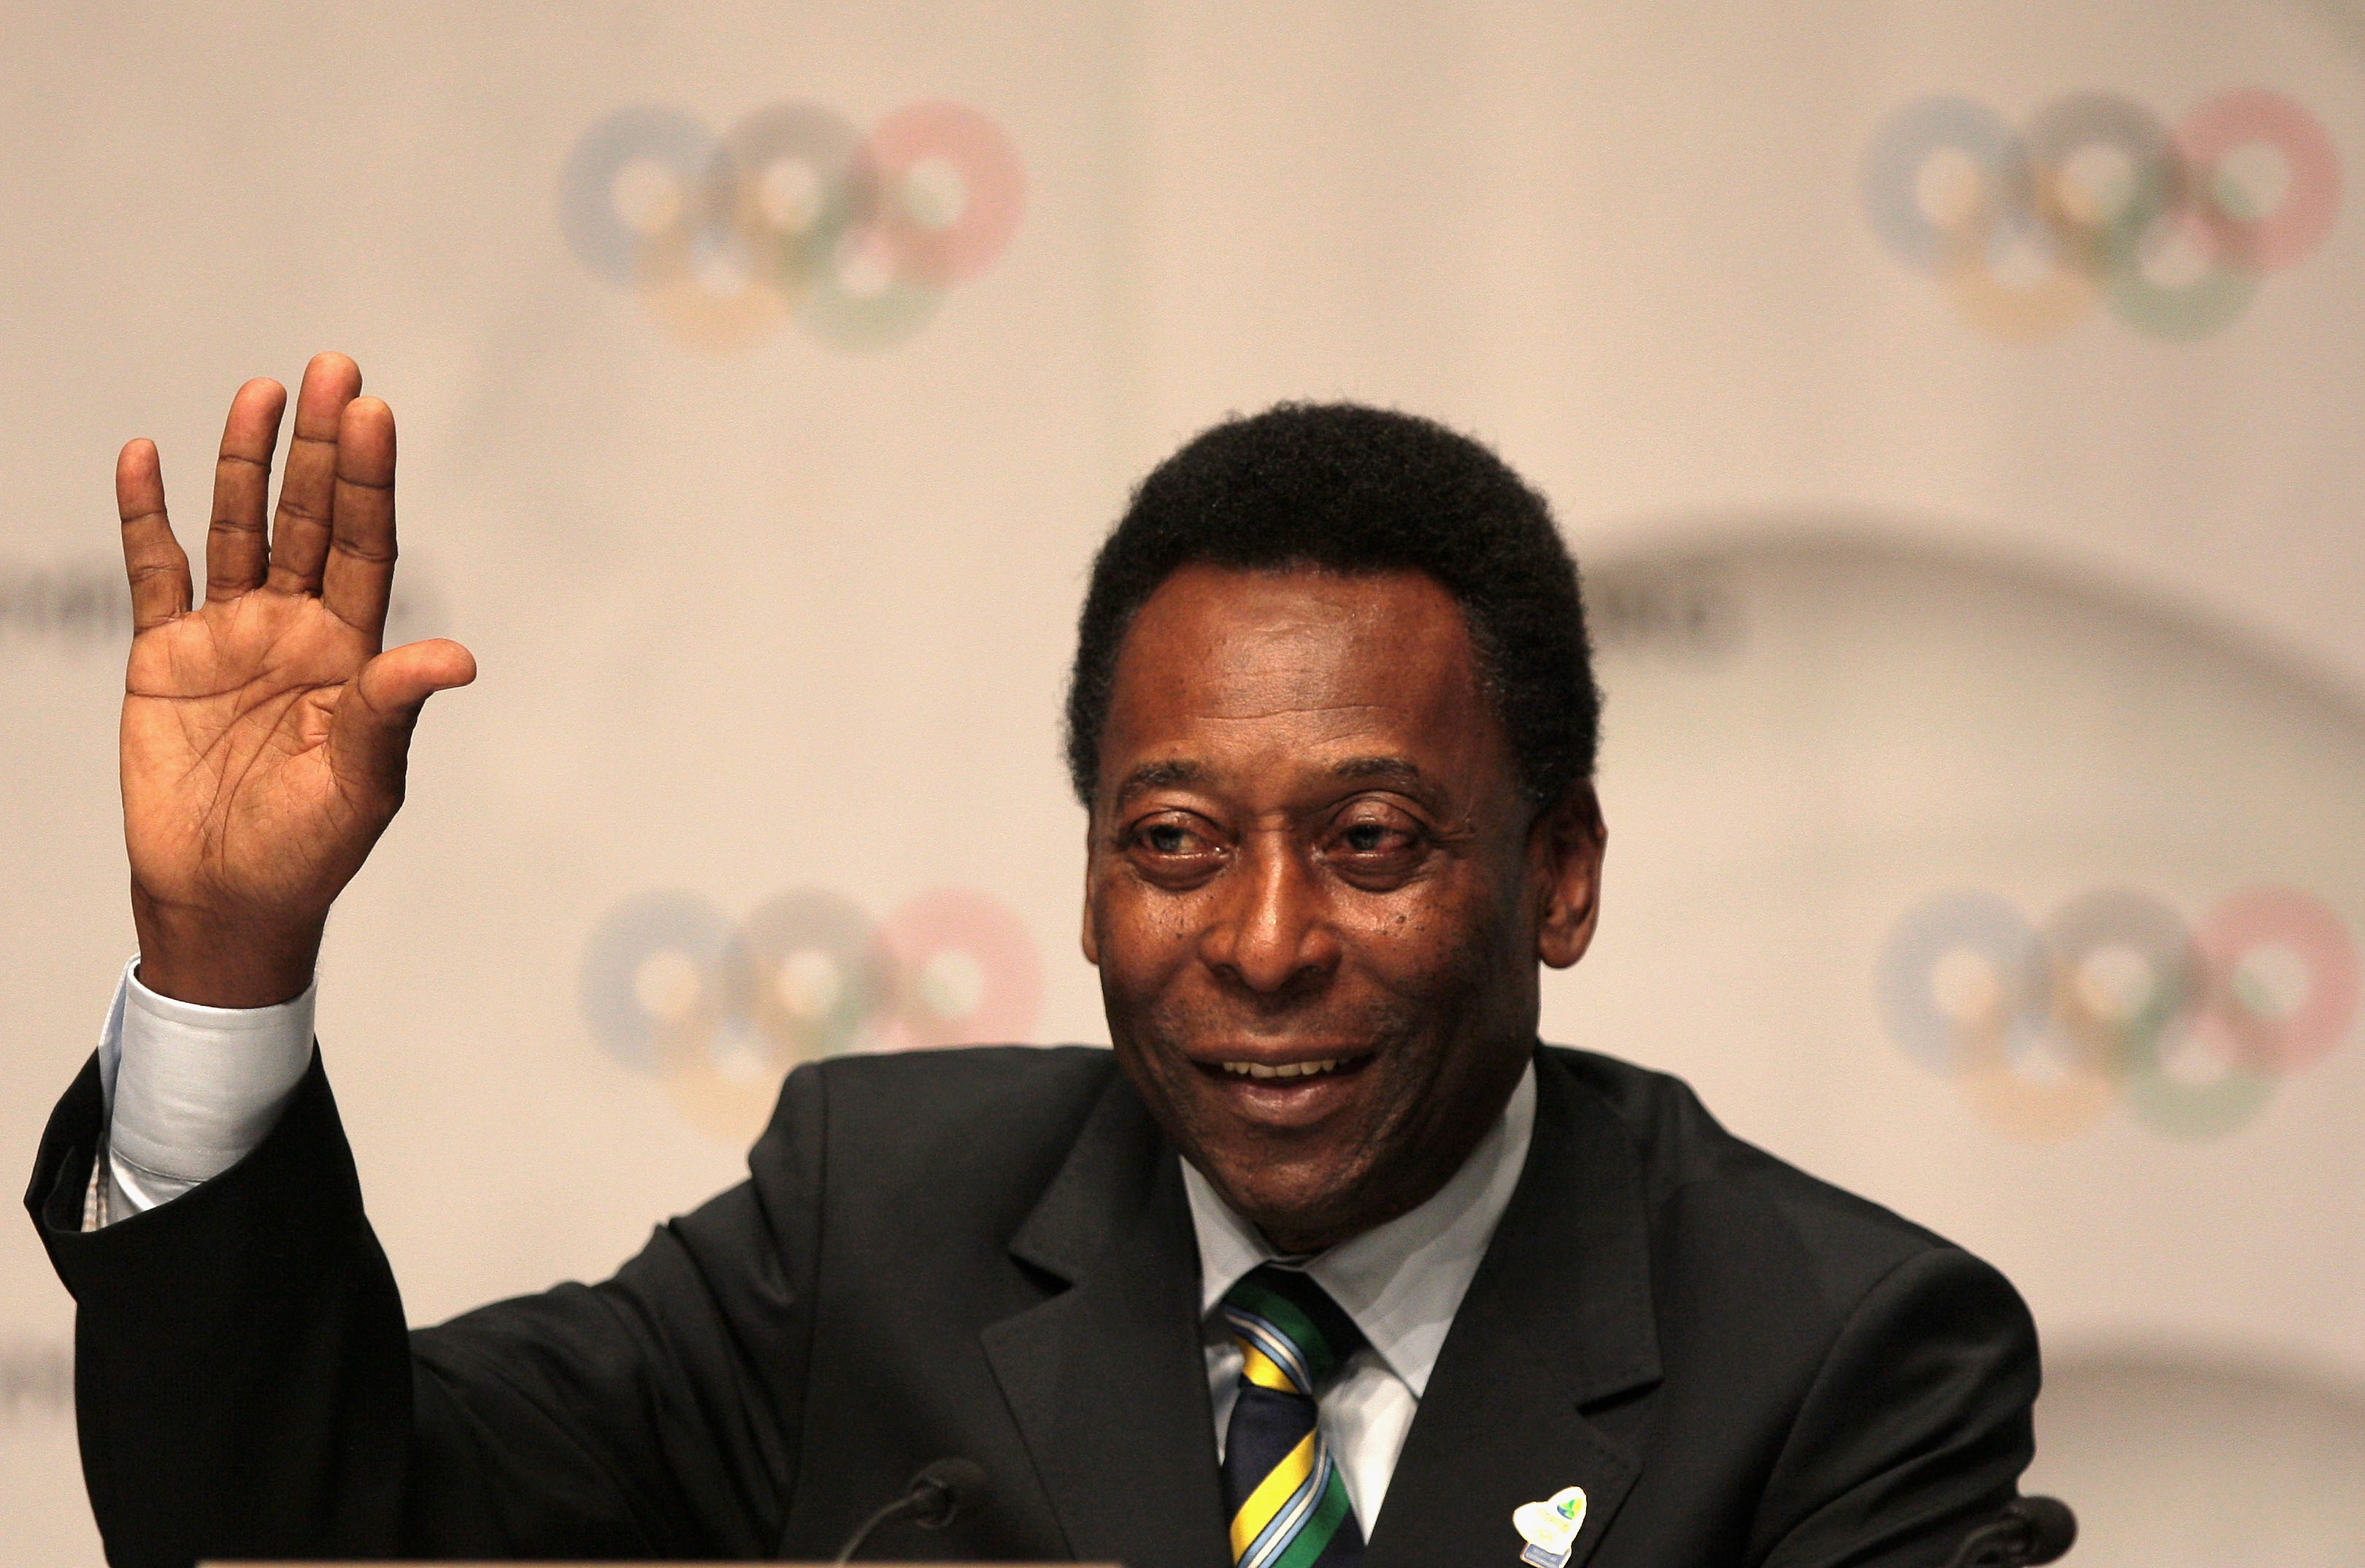 COPENHAGEN, DENMARK - OCTOBER 02:  Brazilian football legend Pele gestures during a press conference after the Rio 2016 presentation on October 2, 2009 at the Bella Centre in Copenhagen, Denmark. The 121st session of the International Olympic Committee (I